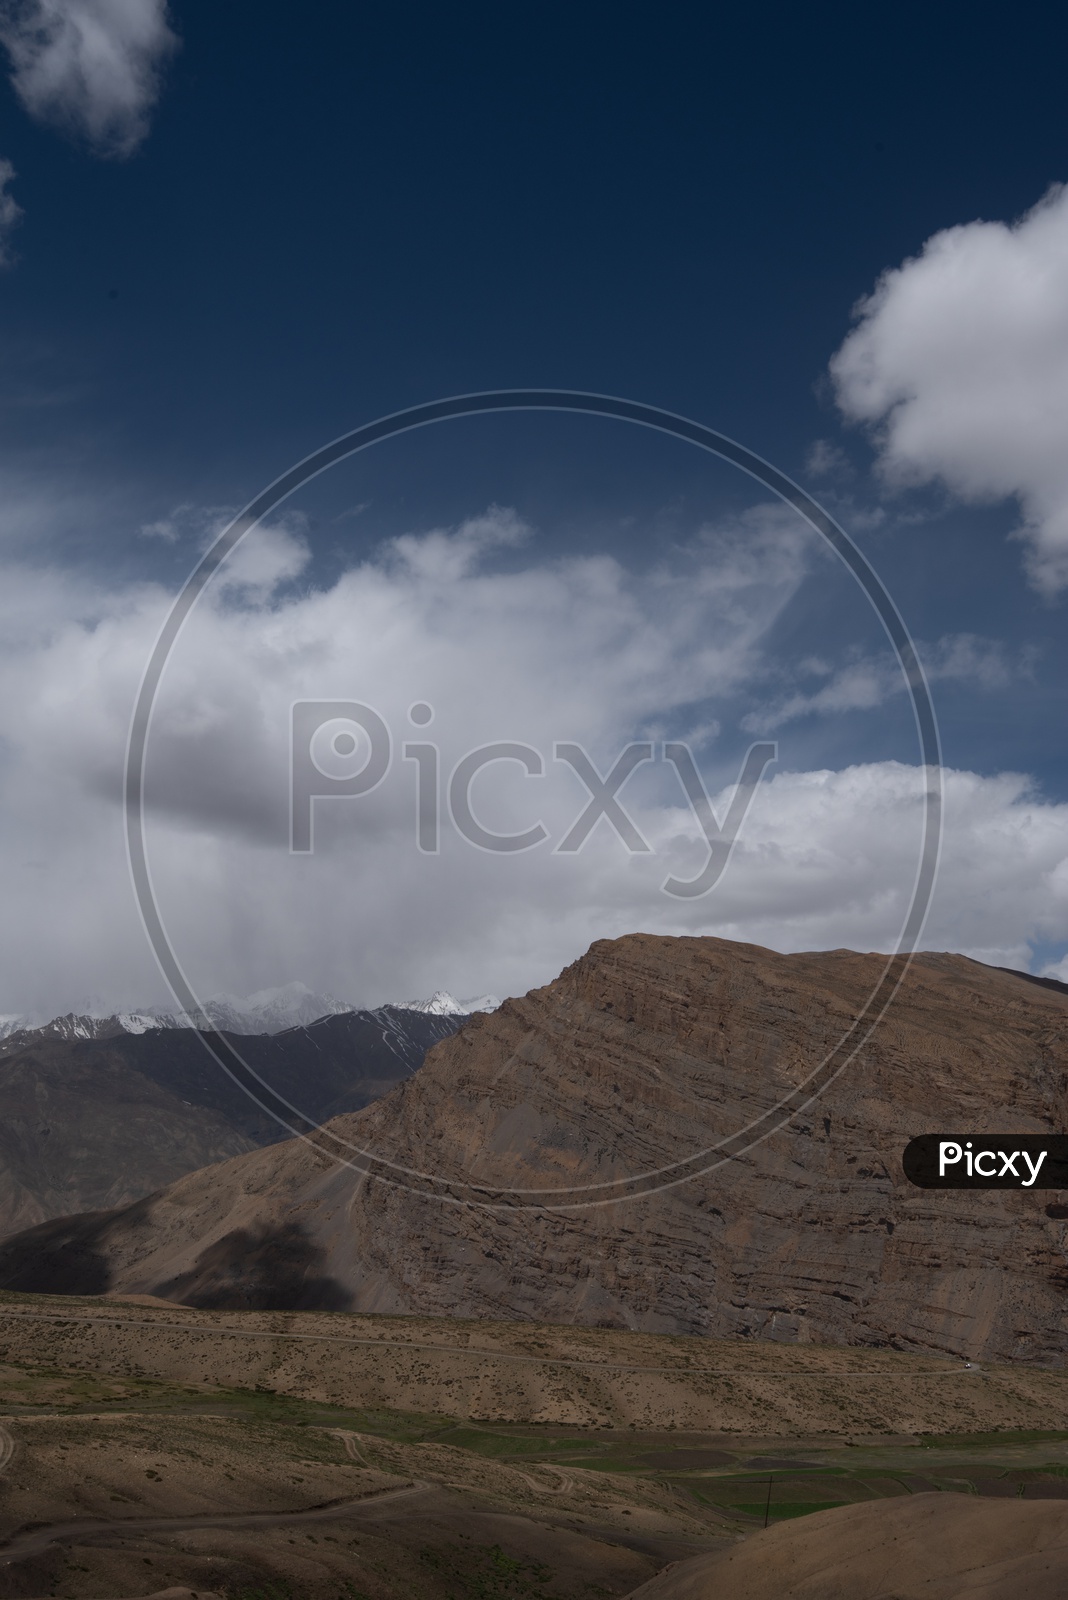 Valley Views of leh / ladakh with Mountains and Dunes With Blue sky and Clouds In Backdrop